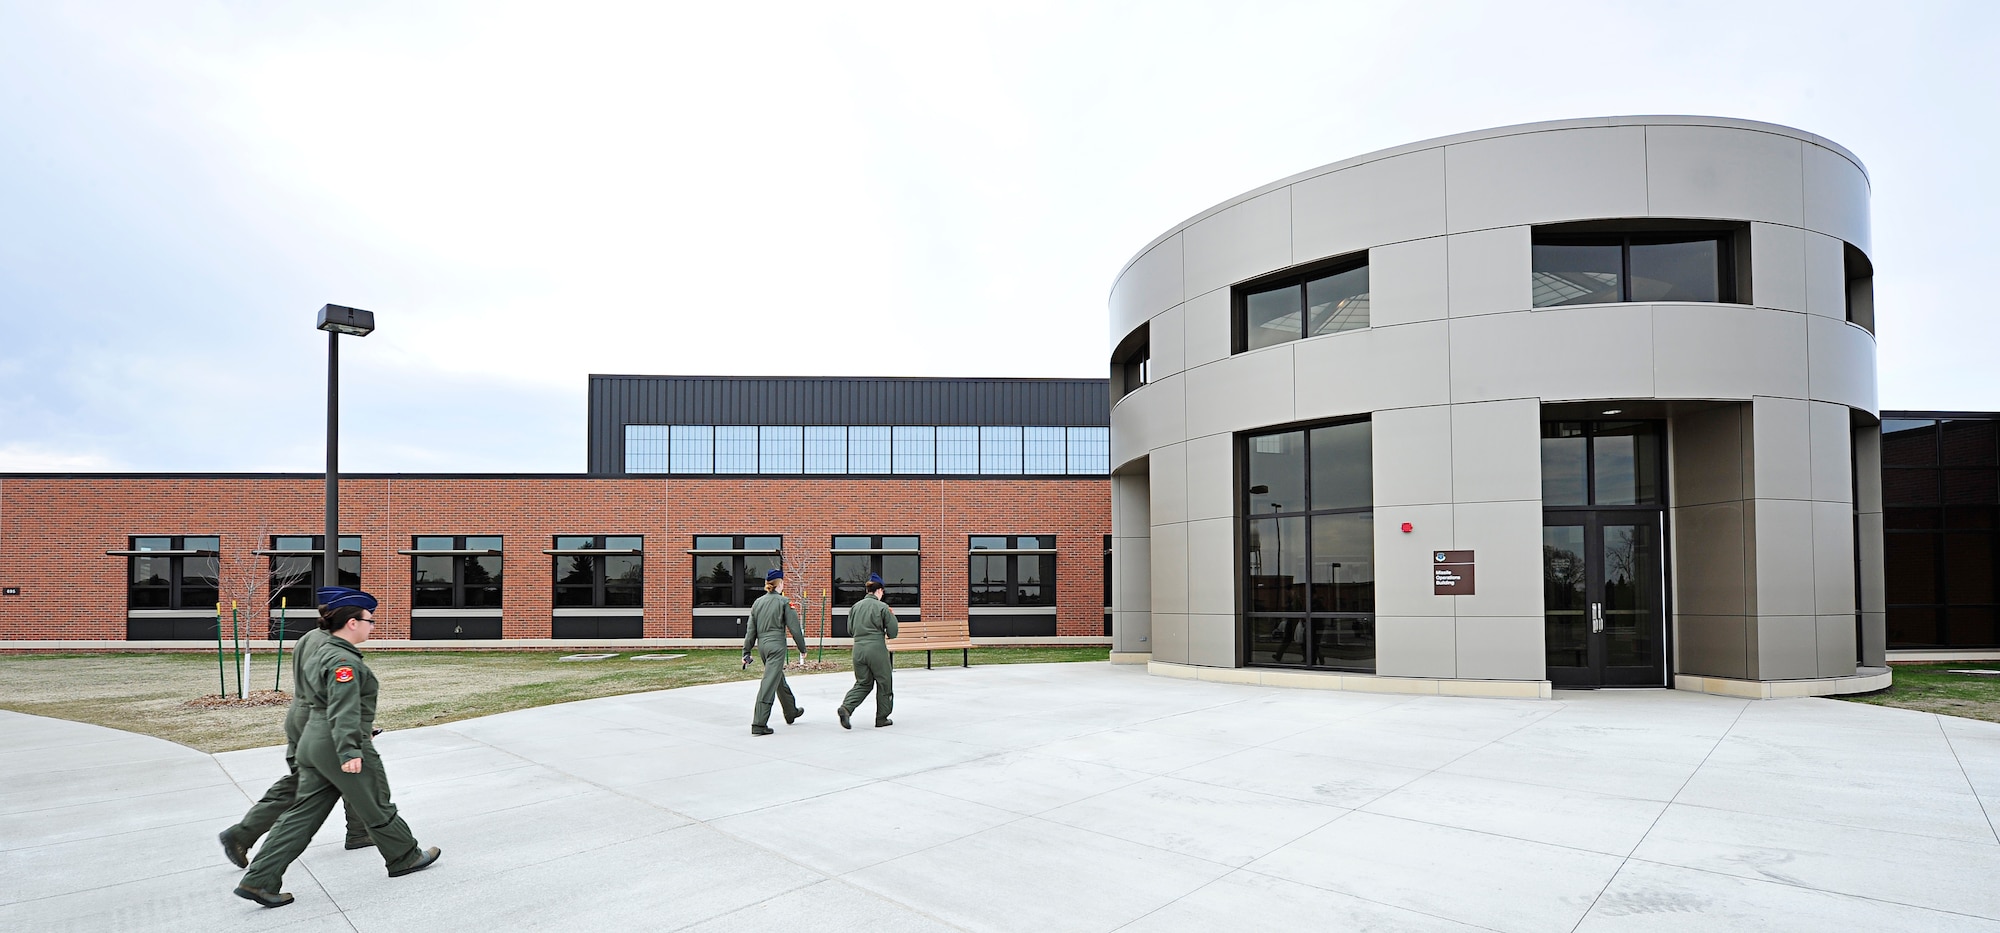 MINOT AIR FORCE BASE, N.D. -- The 91st Missile Wing Operations building was recently awarded a gold rating from the U.S. Green Building Council. (U.S. Air Force photo/Senior Airman Desiree Esposito)